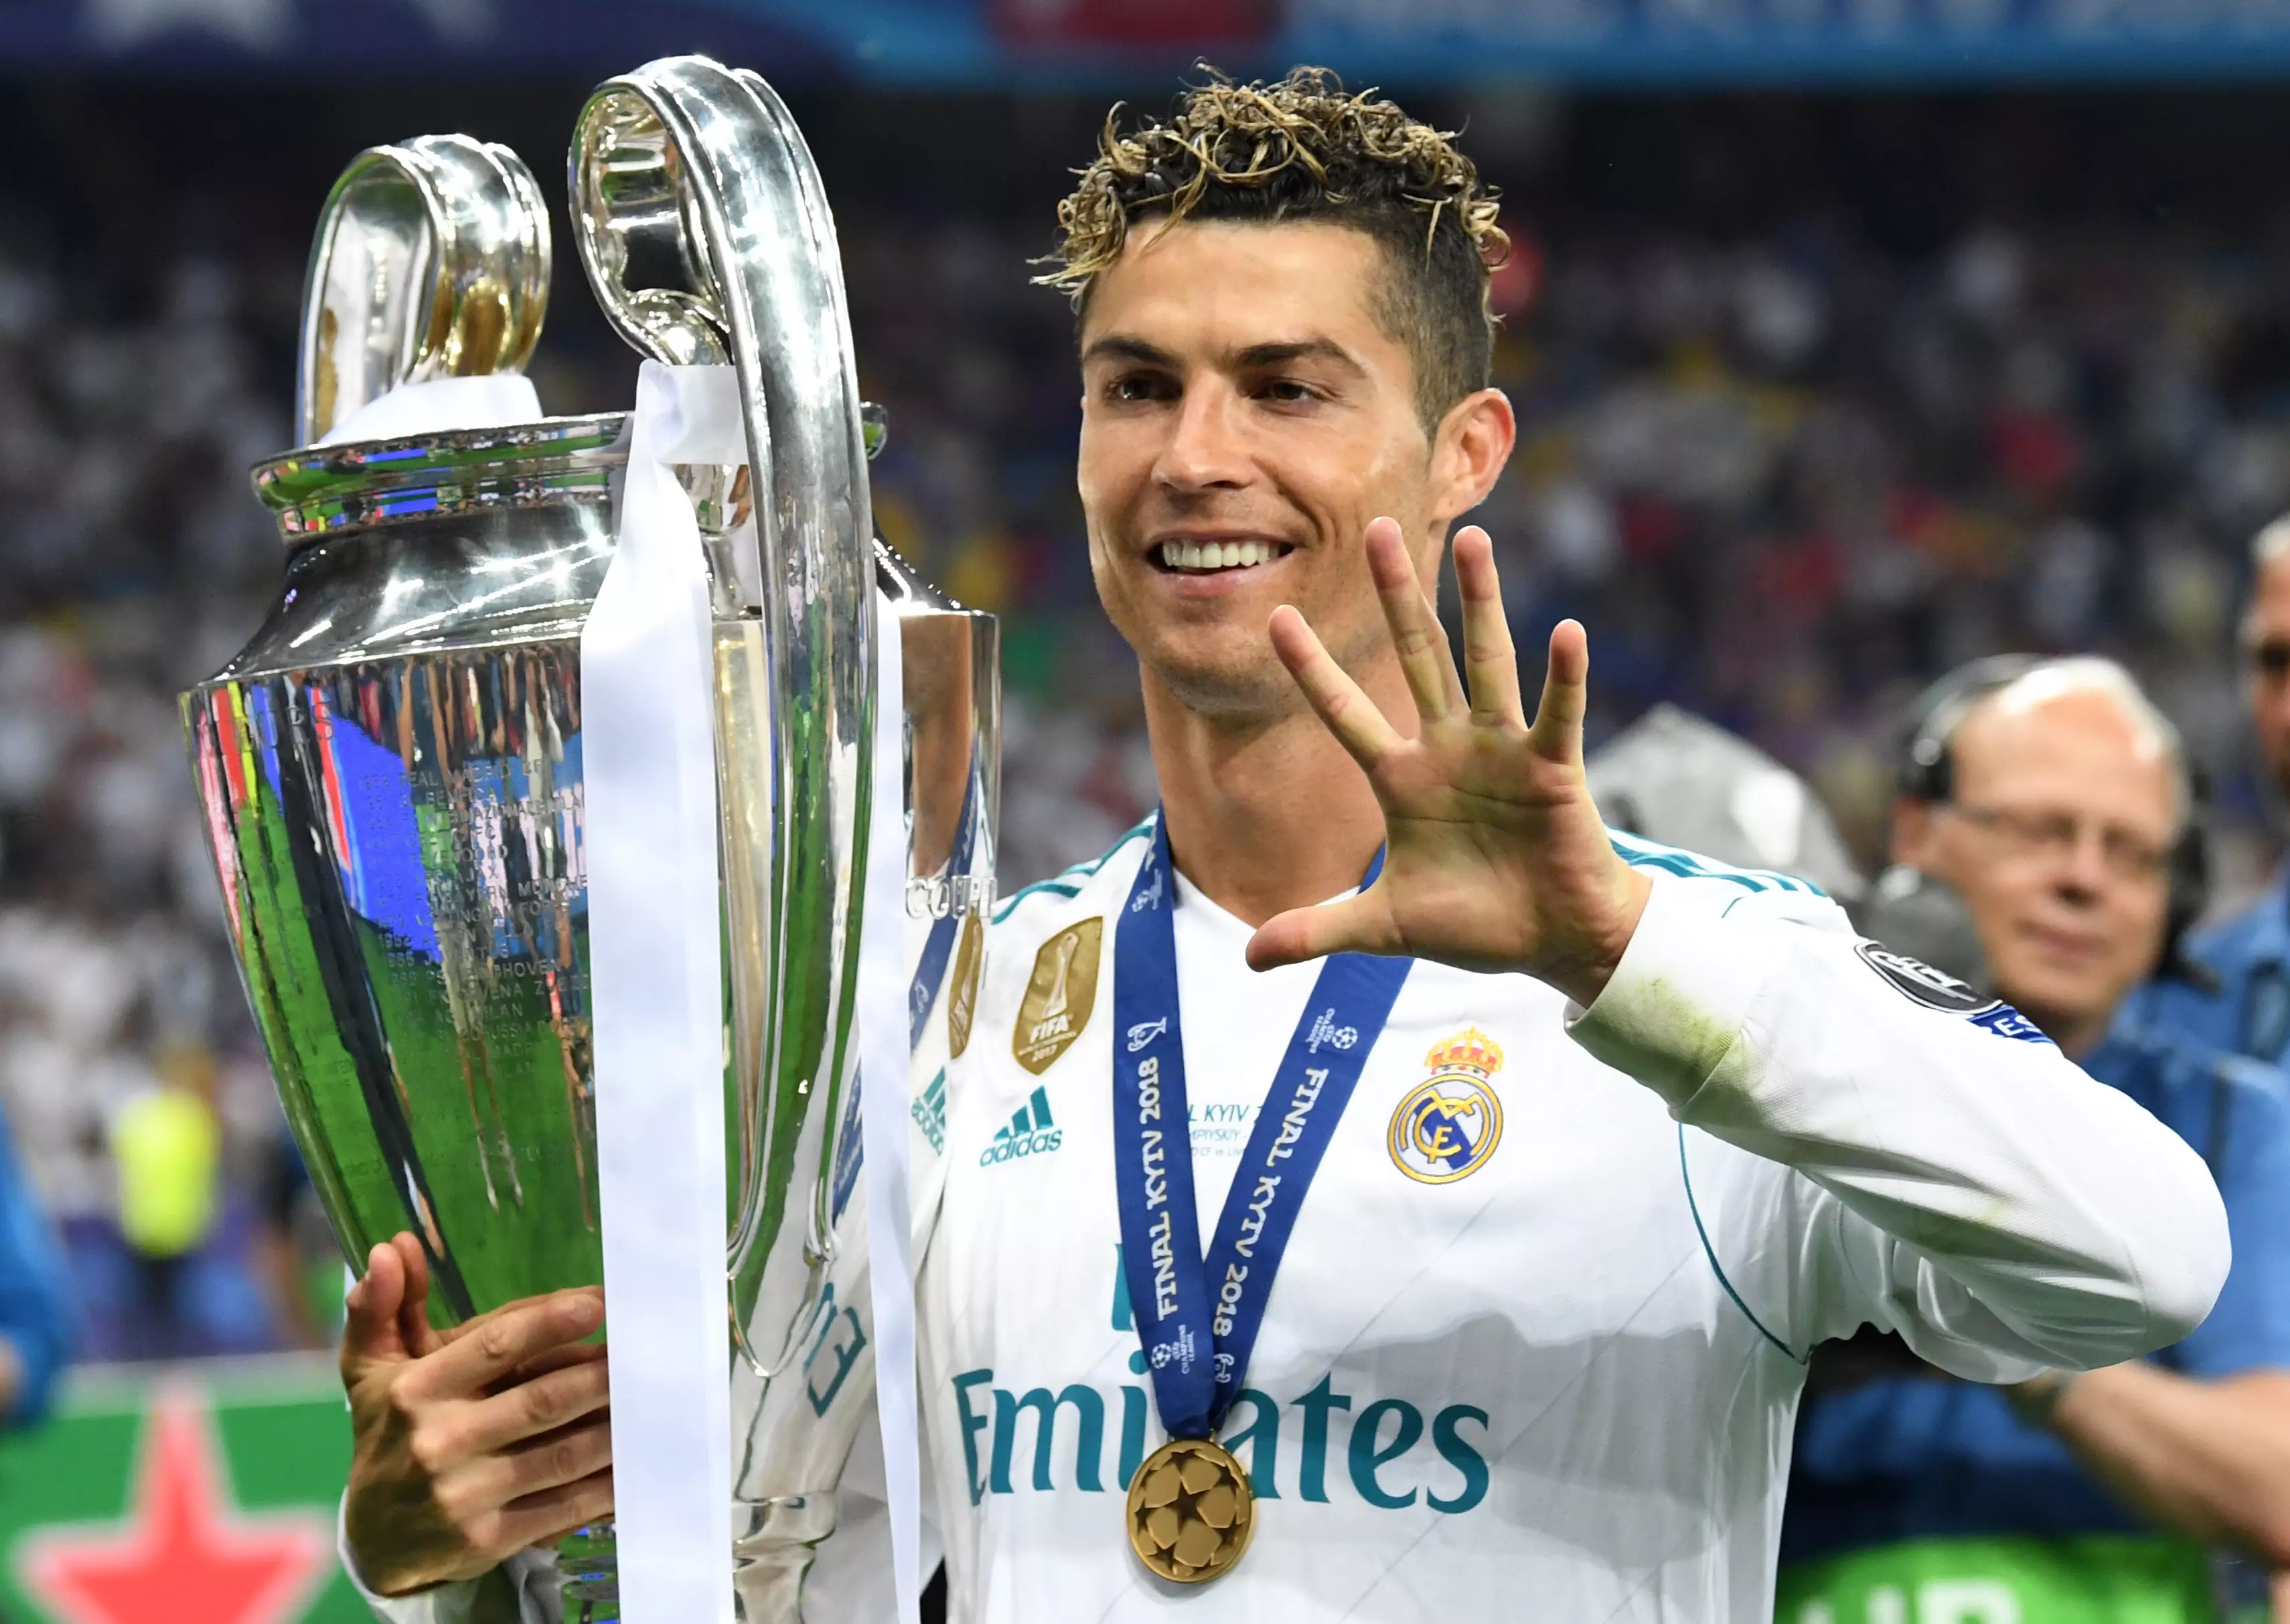 The Portuguese superstar has won pretty much everything there is to win in club football - including the Champions League five times